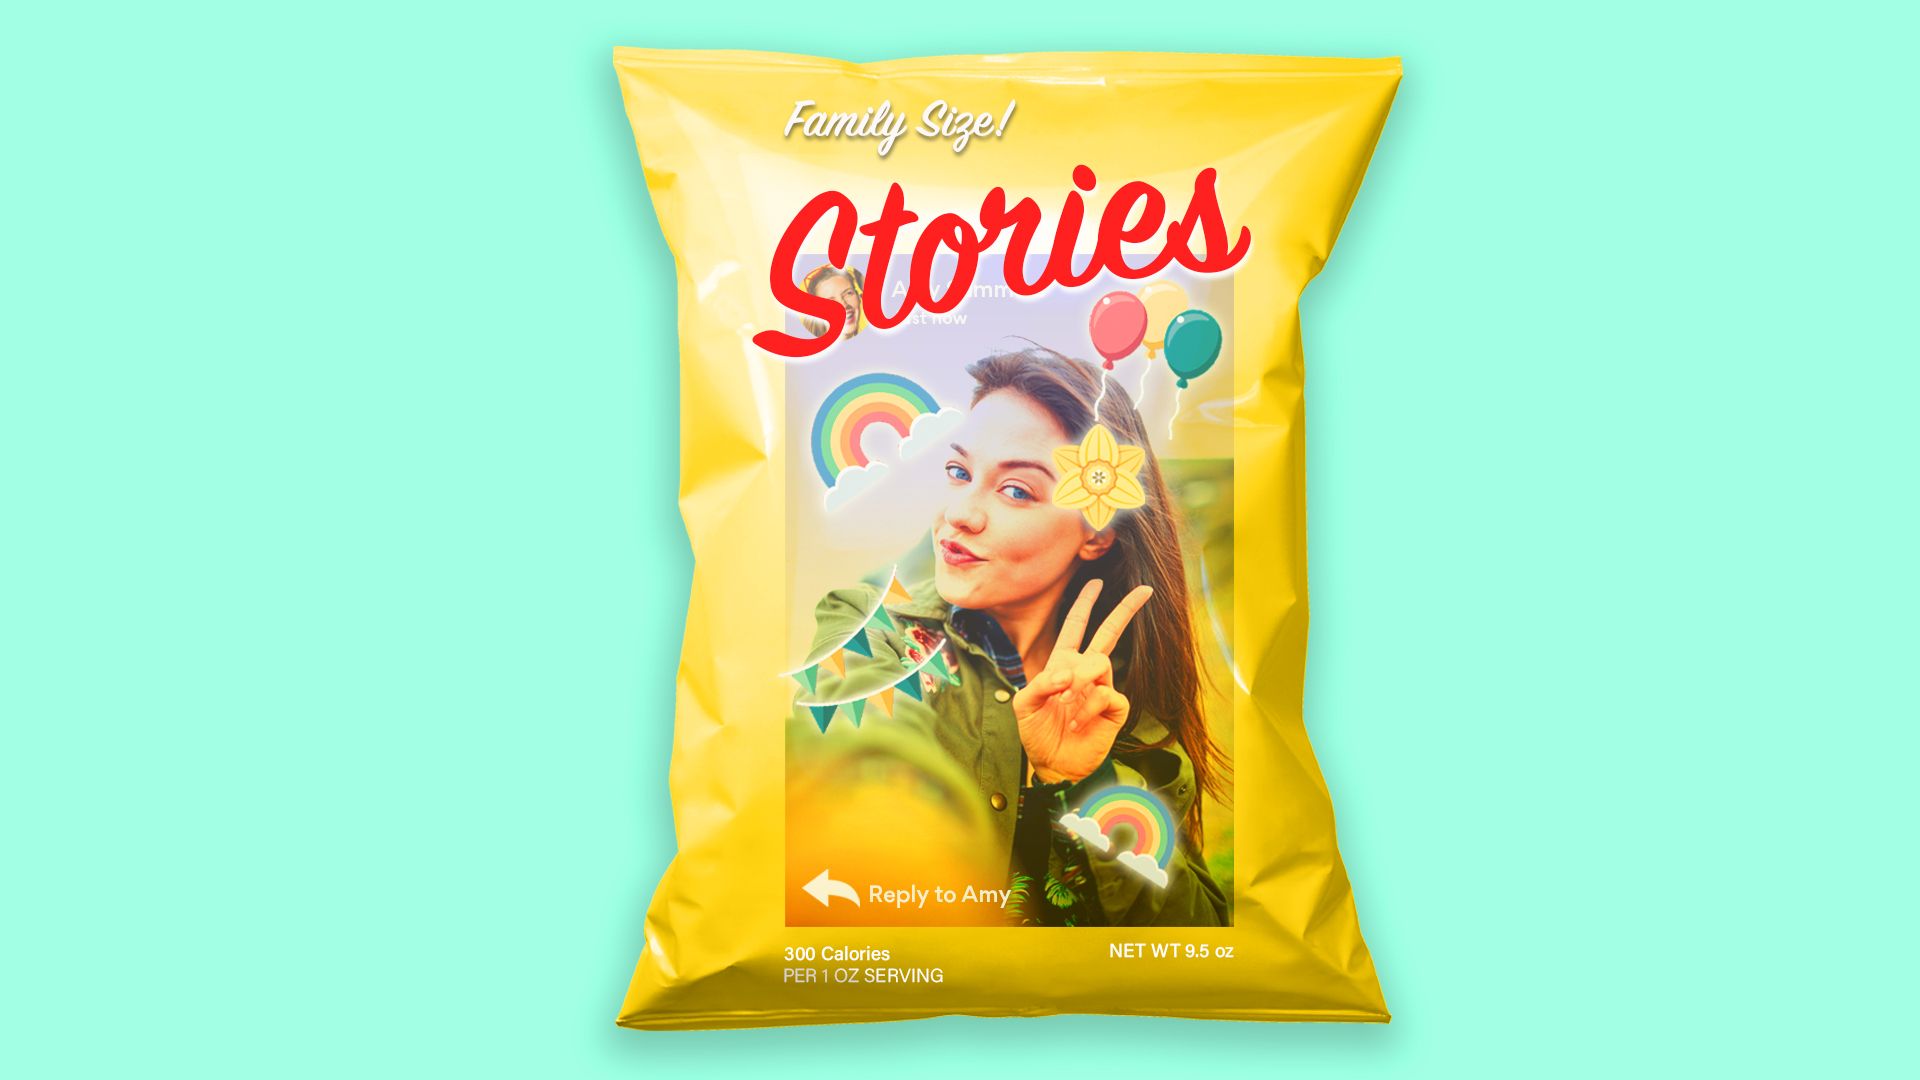 Facebook Stories, pictured as a bag of potato chips